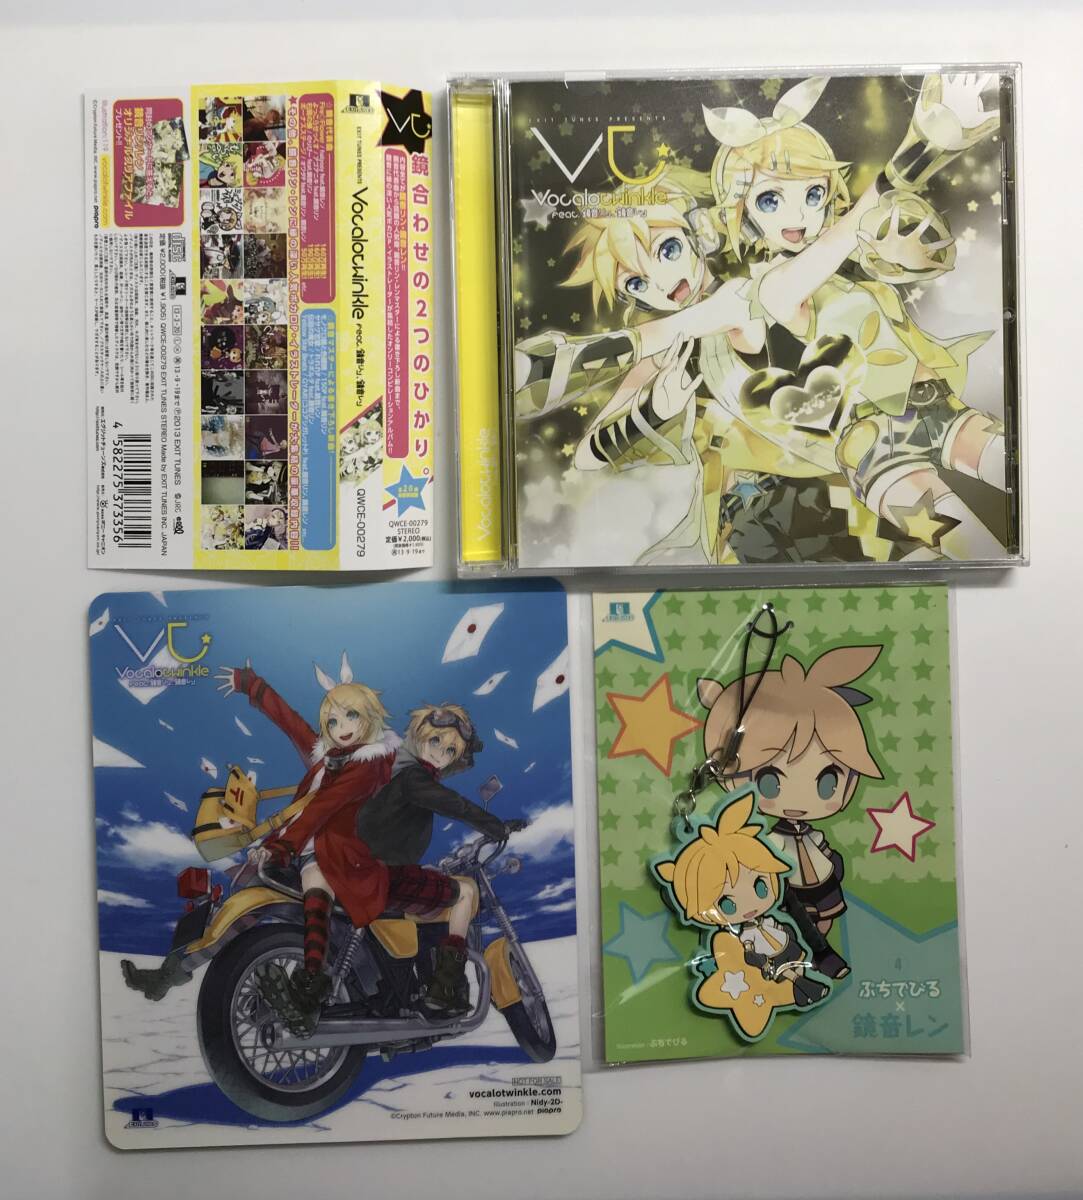 EXIT TUNES PRESENTS Vocalotwinkle feat.鏡音リン、鏡音レン　CD　発売日2013年3月20日　ポニーキャニオン　K-CD186_画像3